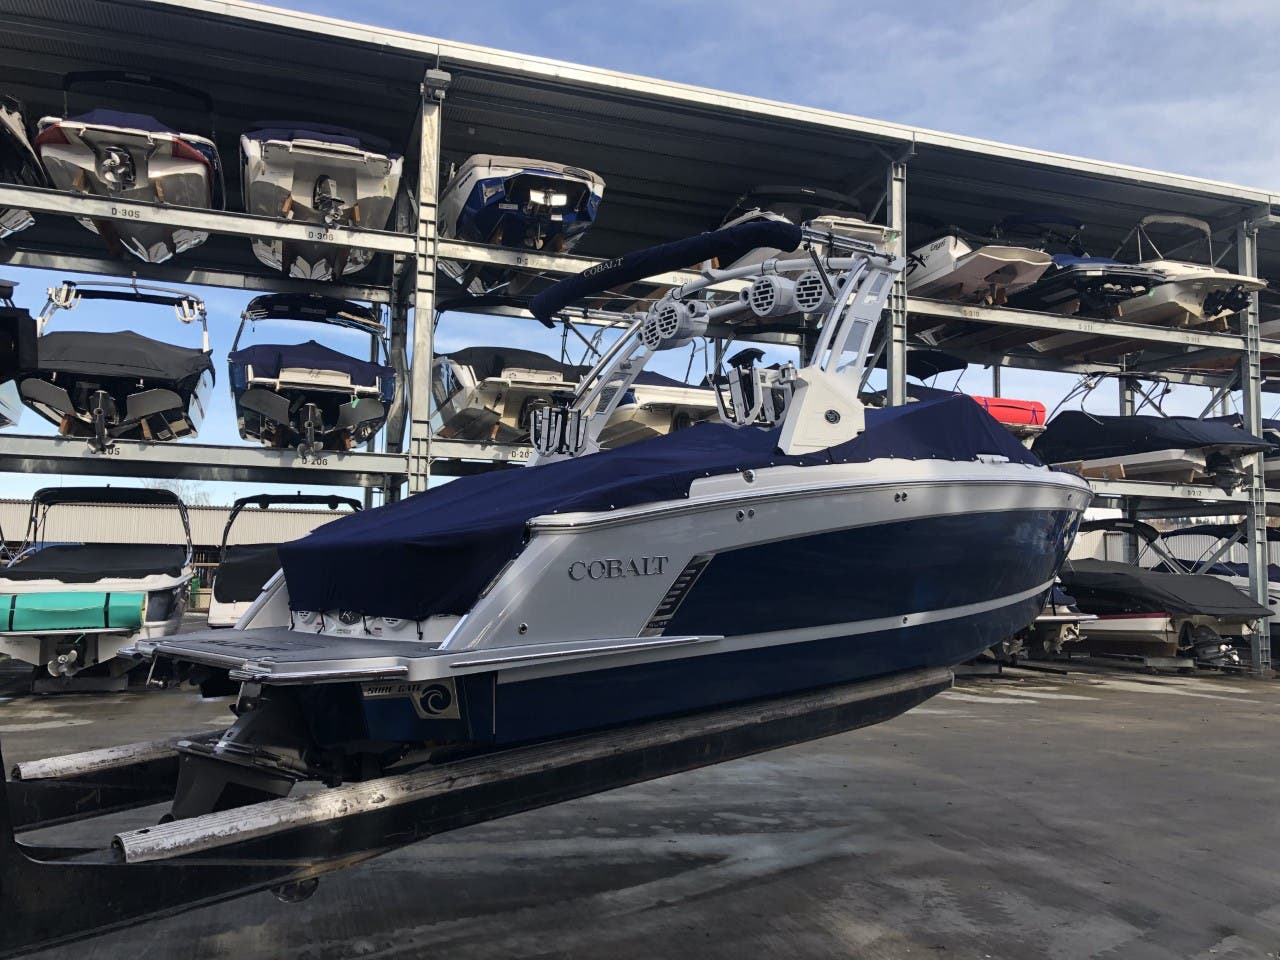 2021 Cobalt R6 Surf Boats For Sale In Seattle WA Seattle Boat Company